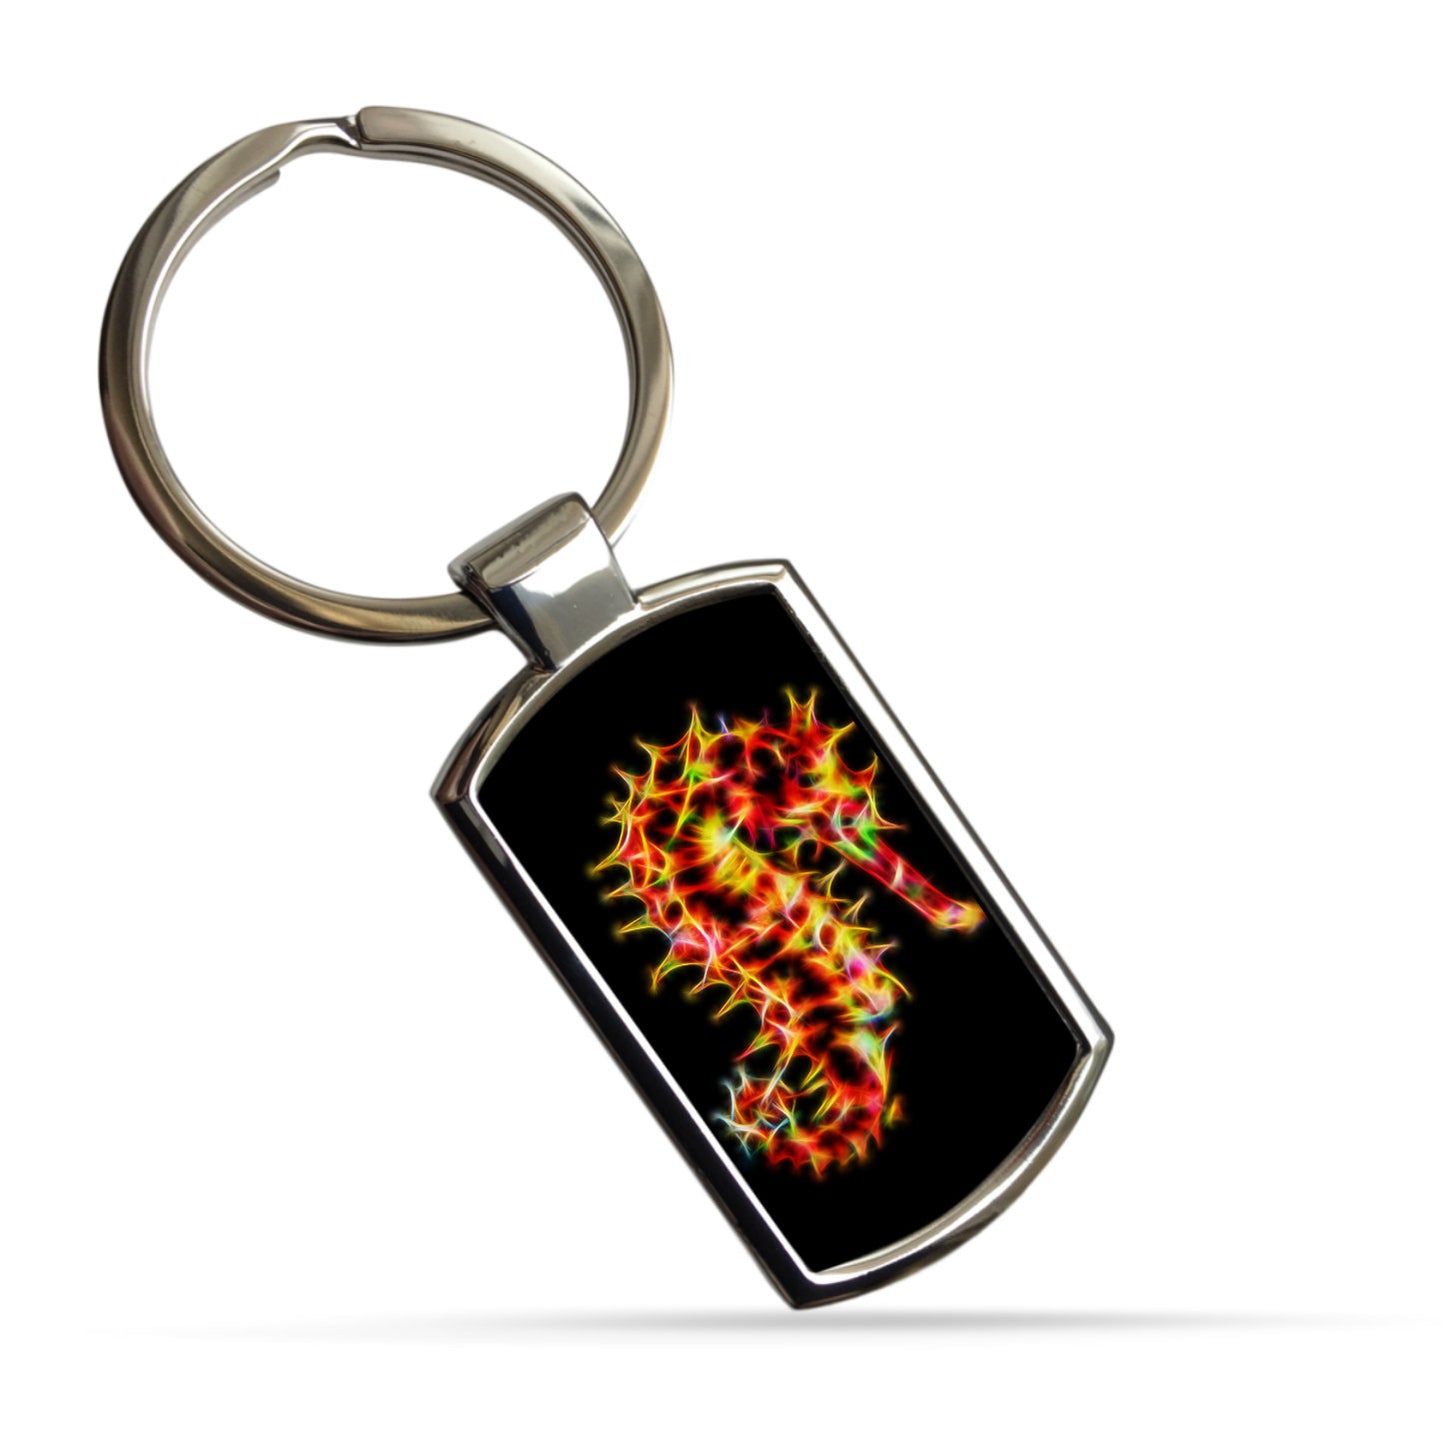 Seahorse Keychain. A Perfect Gift for Aquatic Lover.